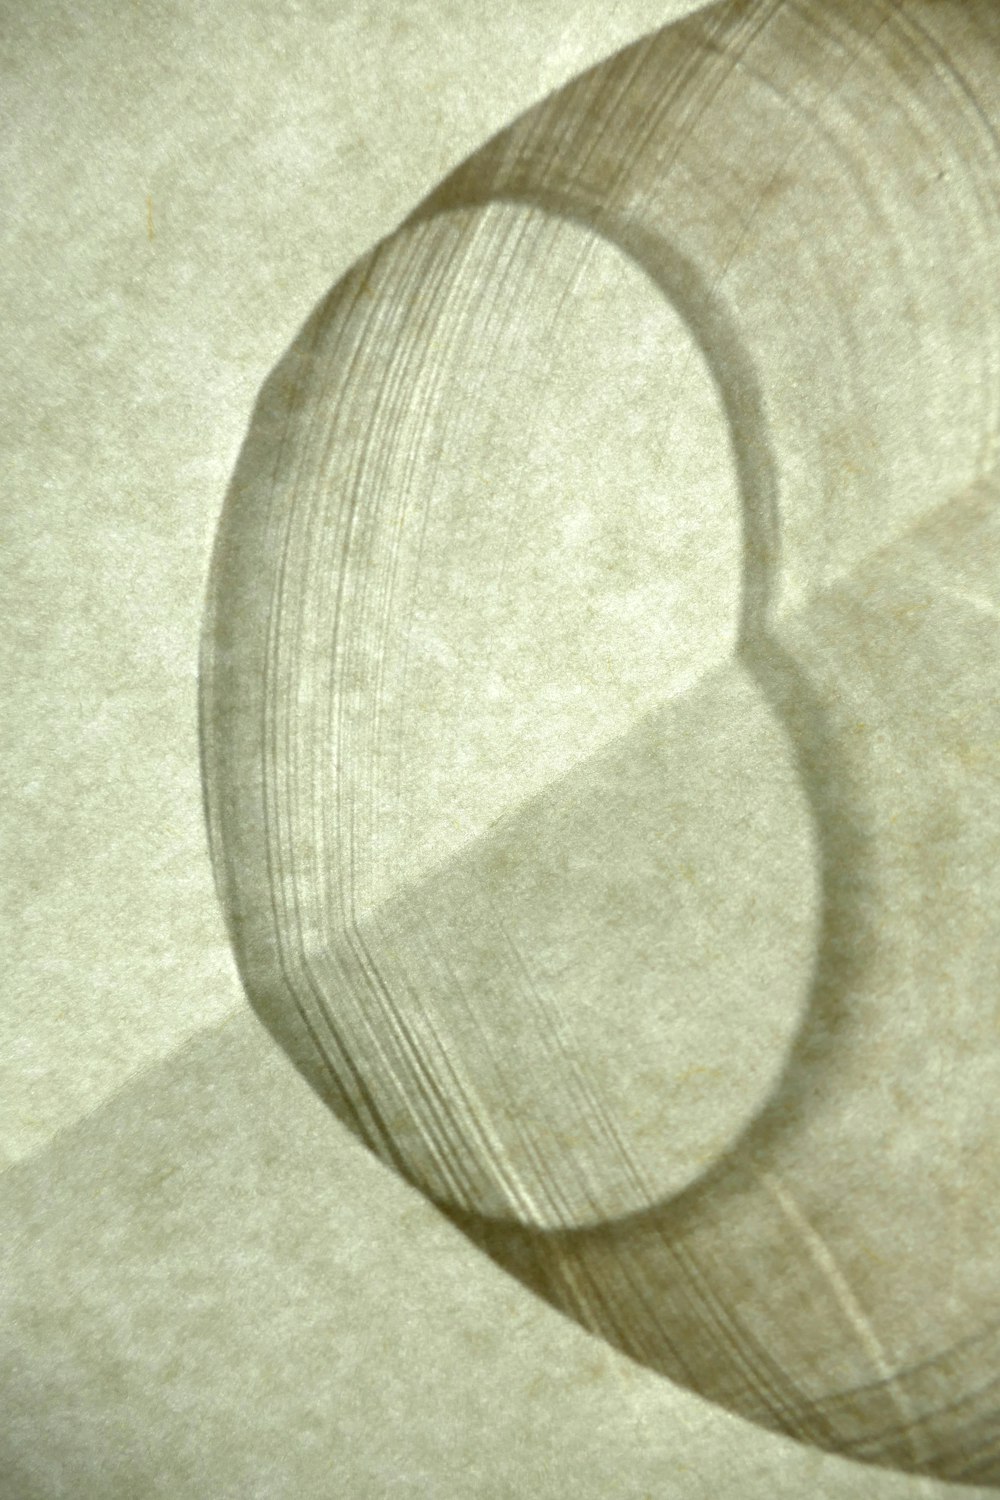 a close up of a piece of paper on a table